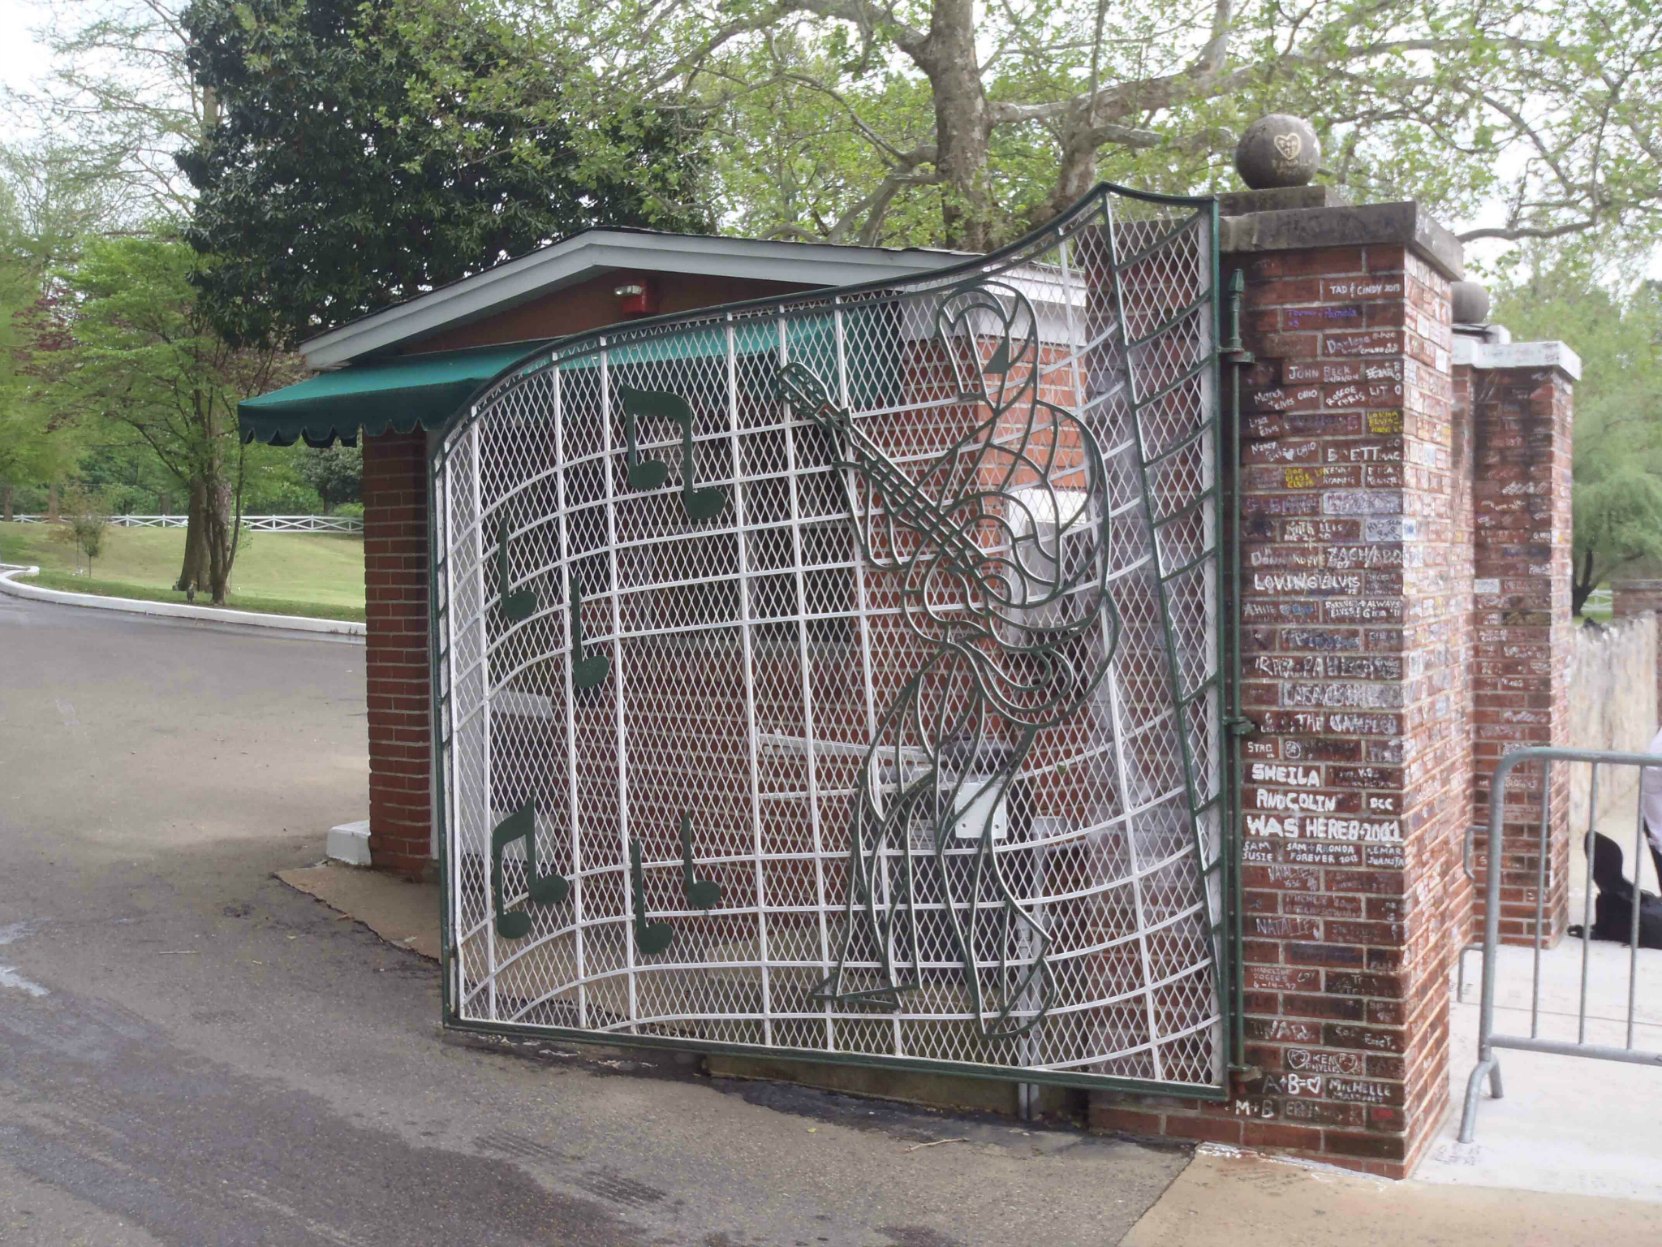 The right hand entrance gate of Graceland, Elvis Presley's home in Memphis Tennessee